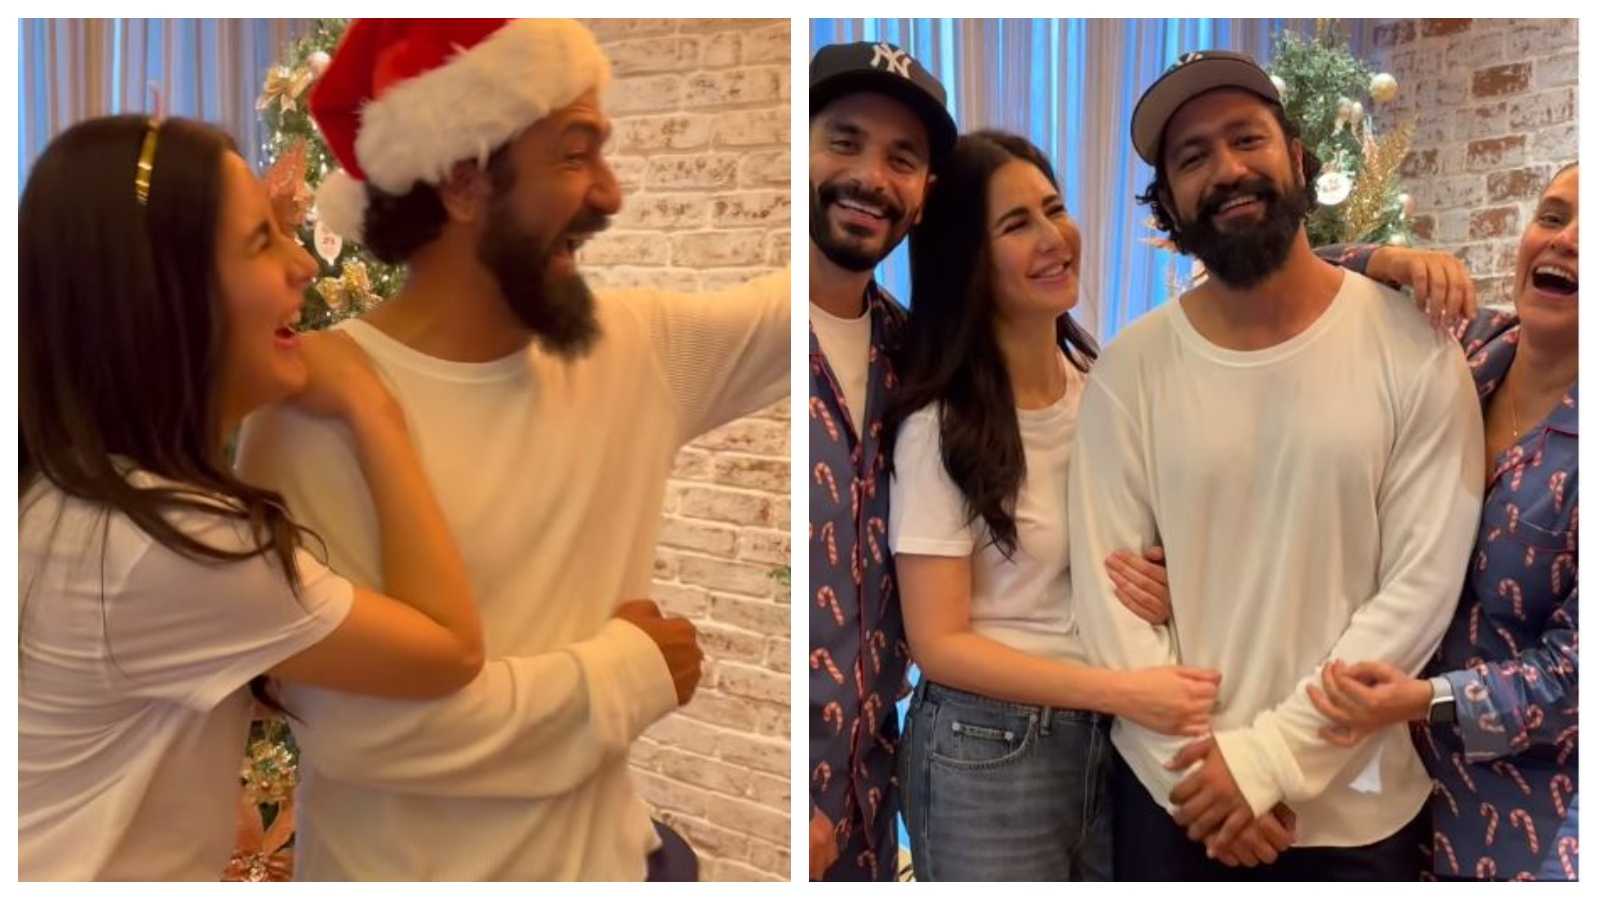 'One of your best performances..': Katrina Kaif receives heartwarming praise from Angad Bedi for Merry Christmas